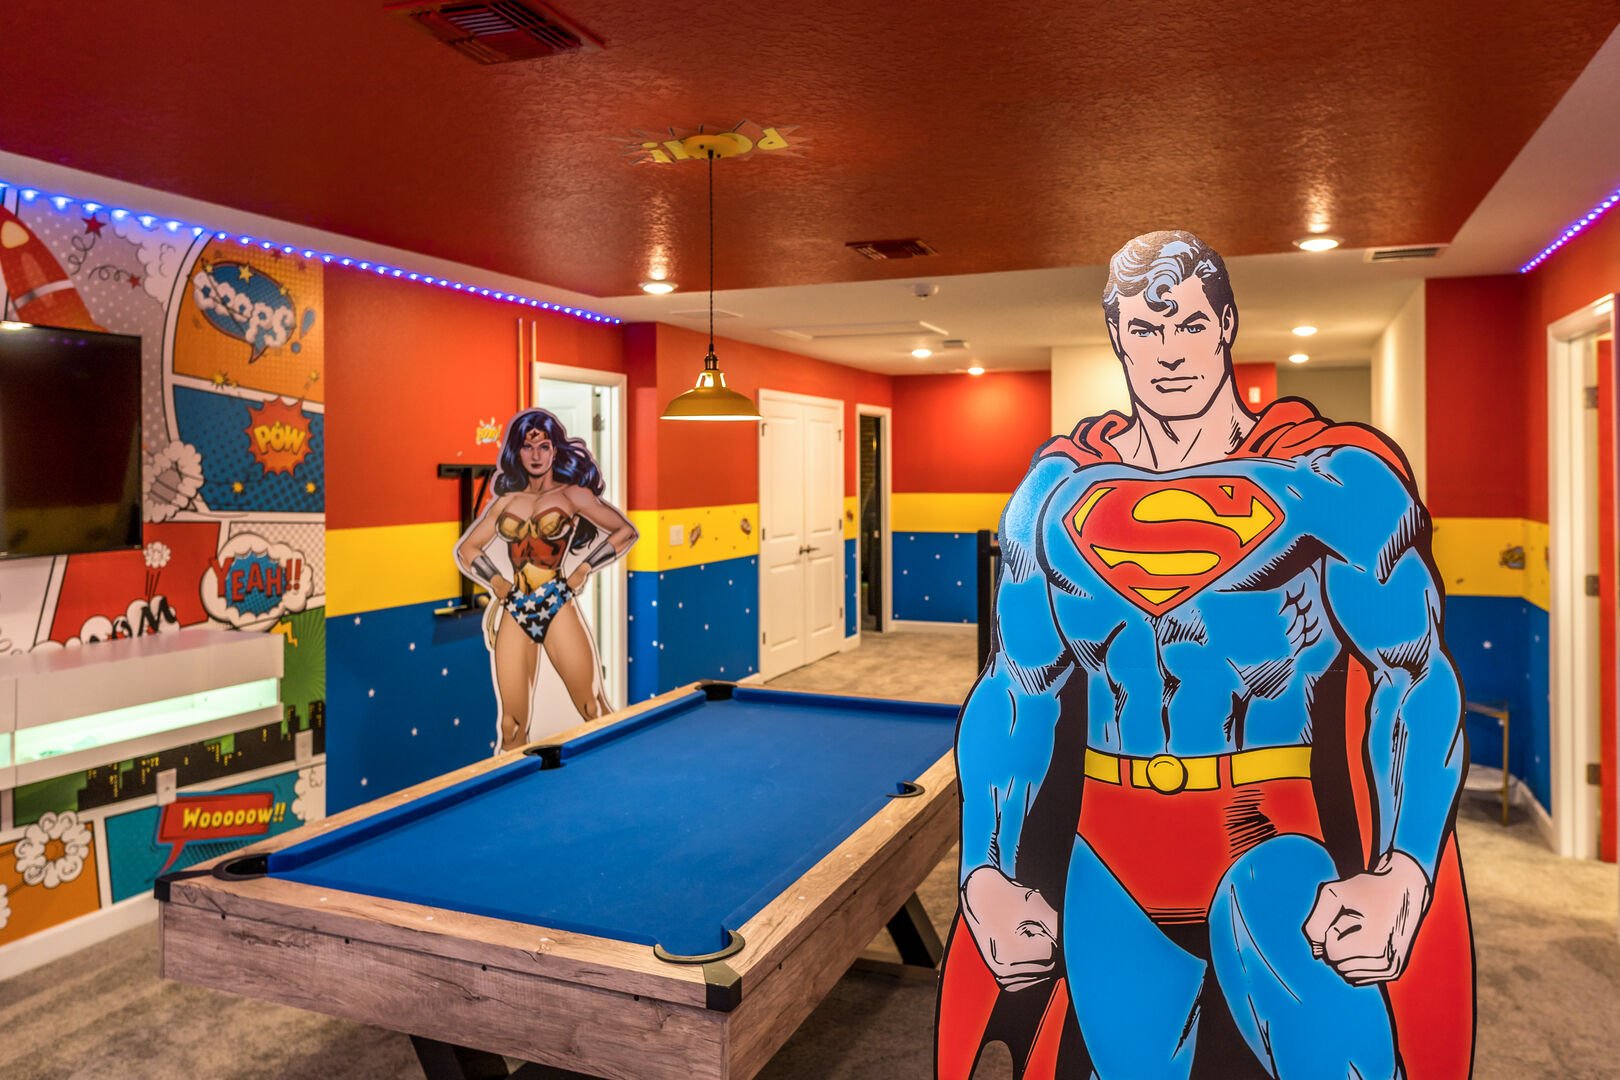 Justice League making sure you're having a great time in the game room!